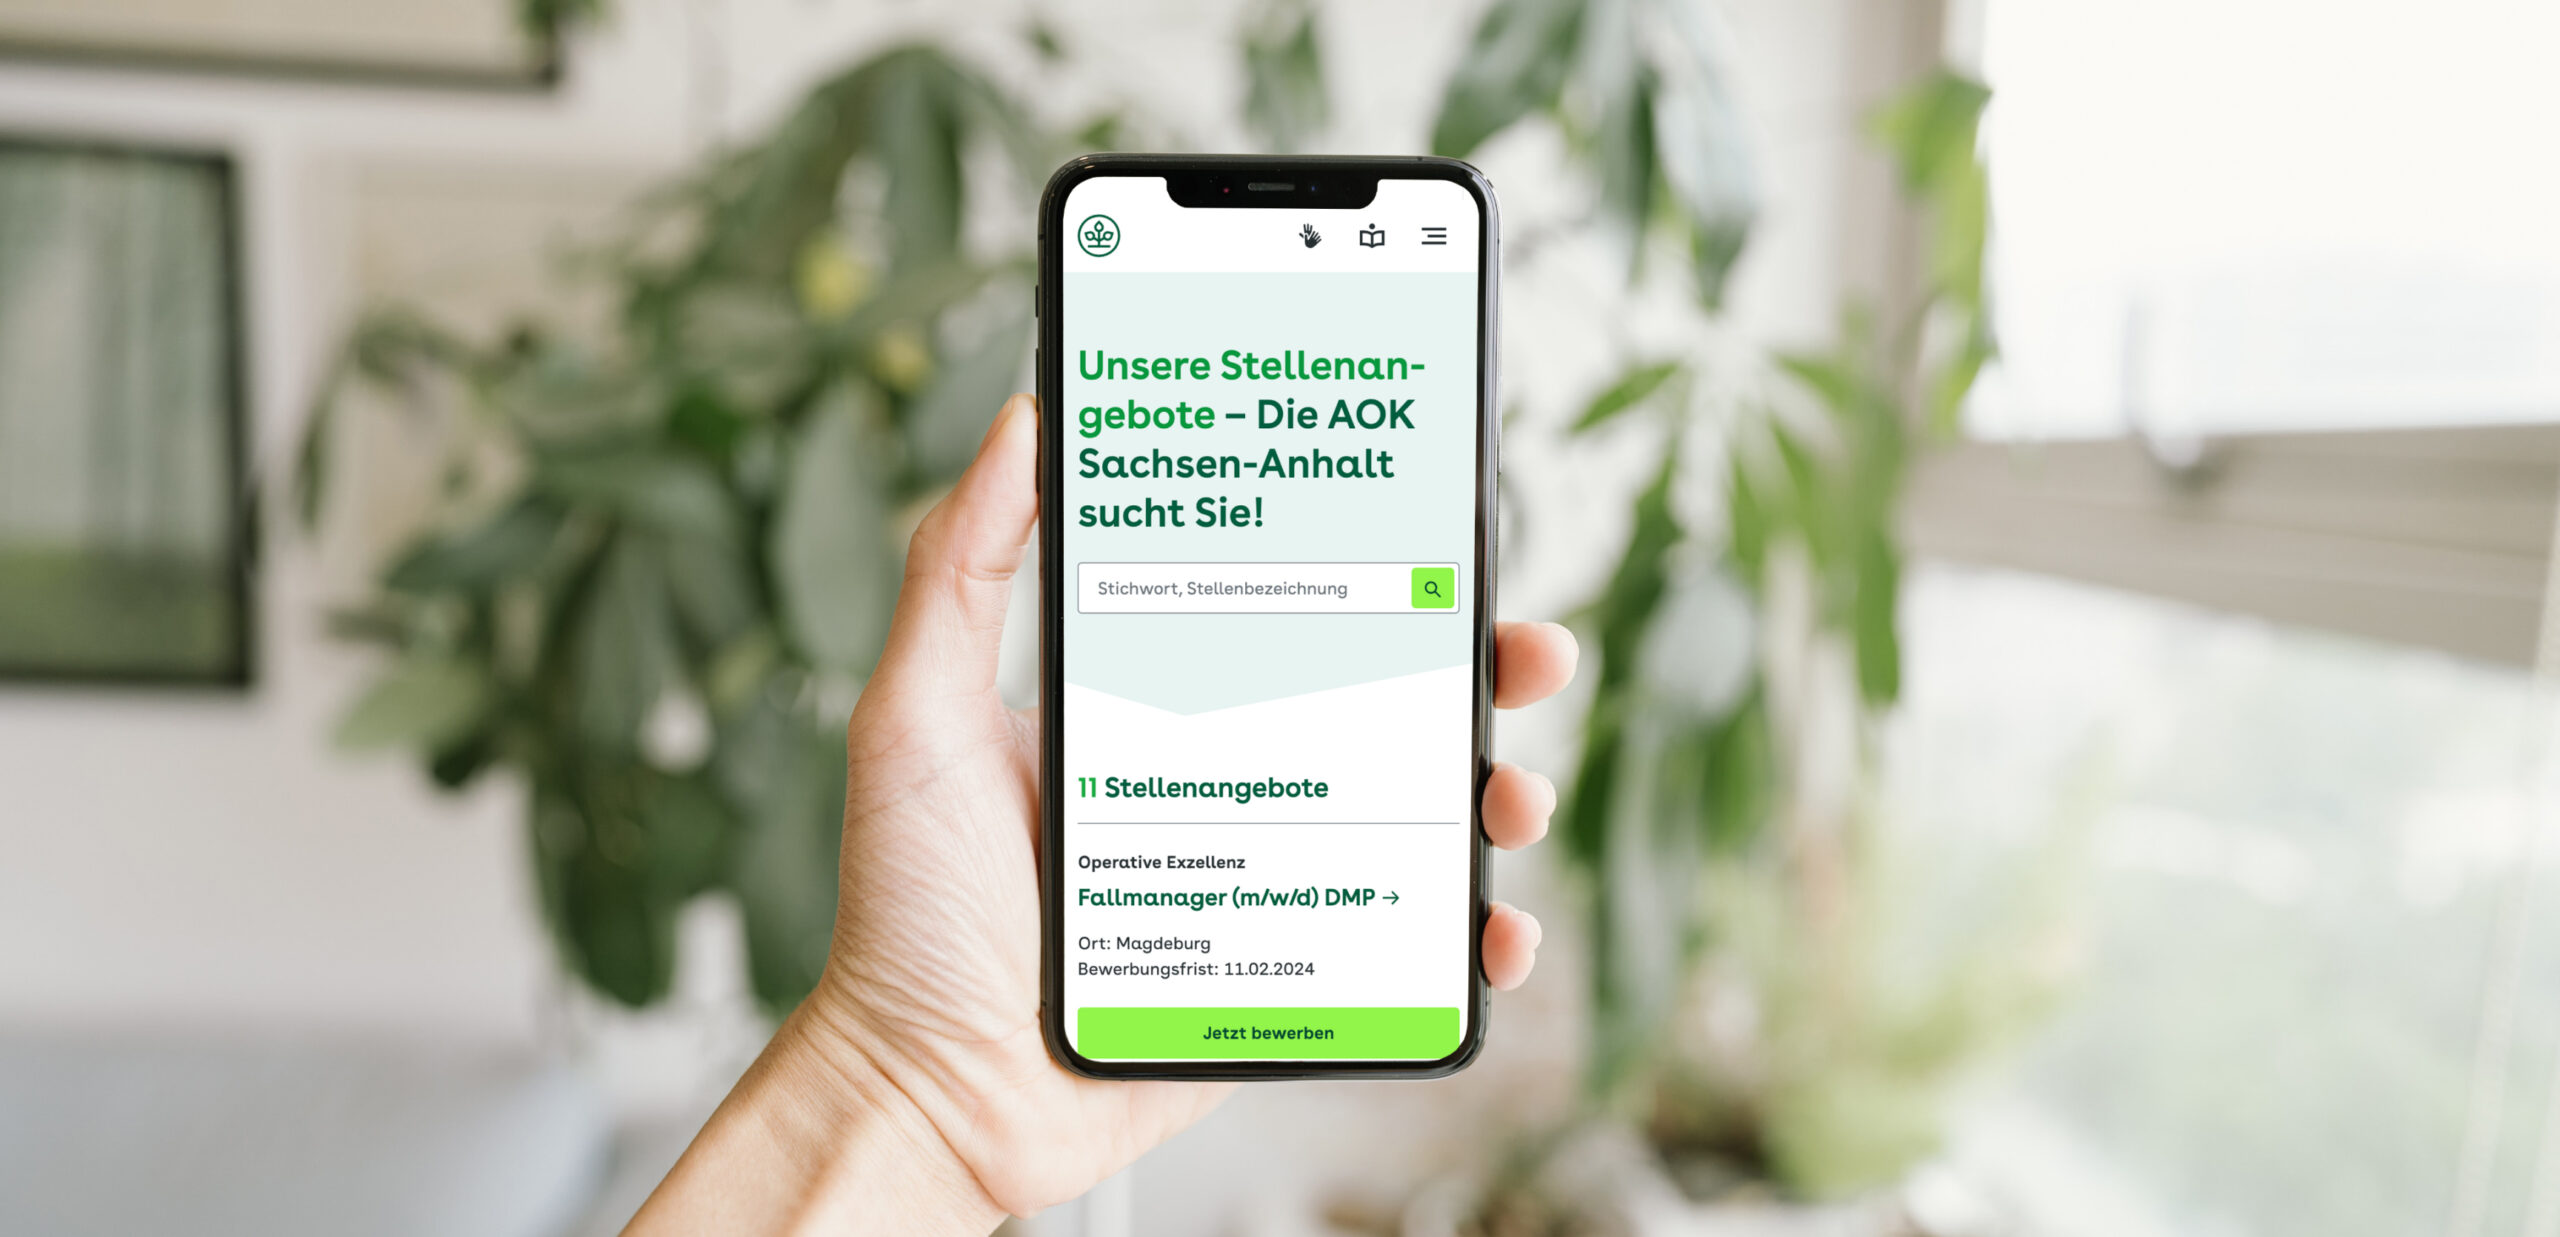 A female hand holding an iPhone showing a screenshot of the career page of AOK Sachsen-Anhalt